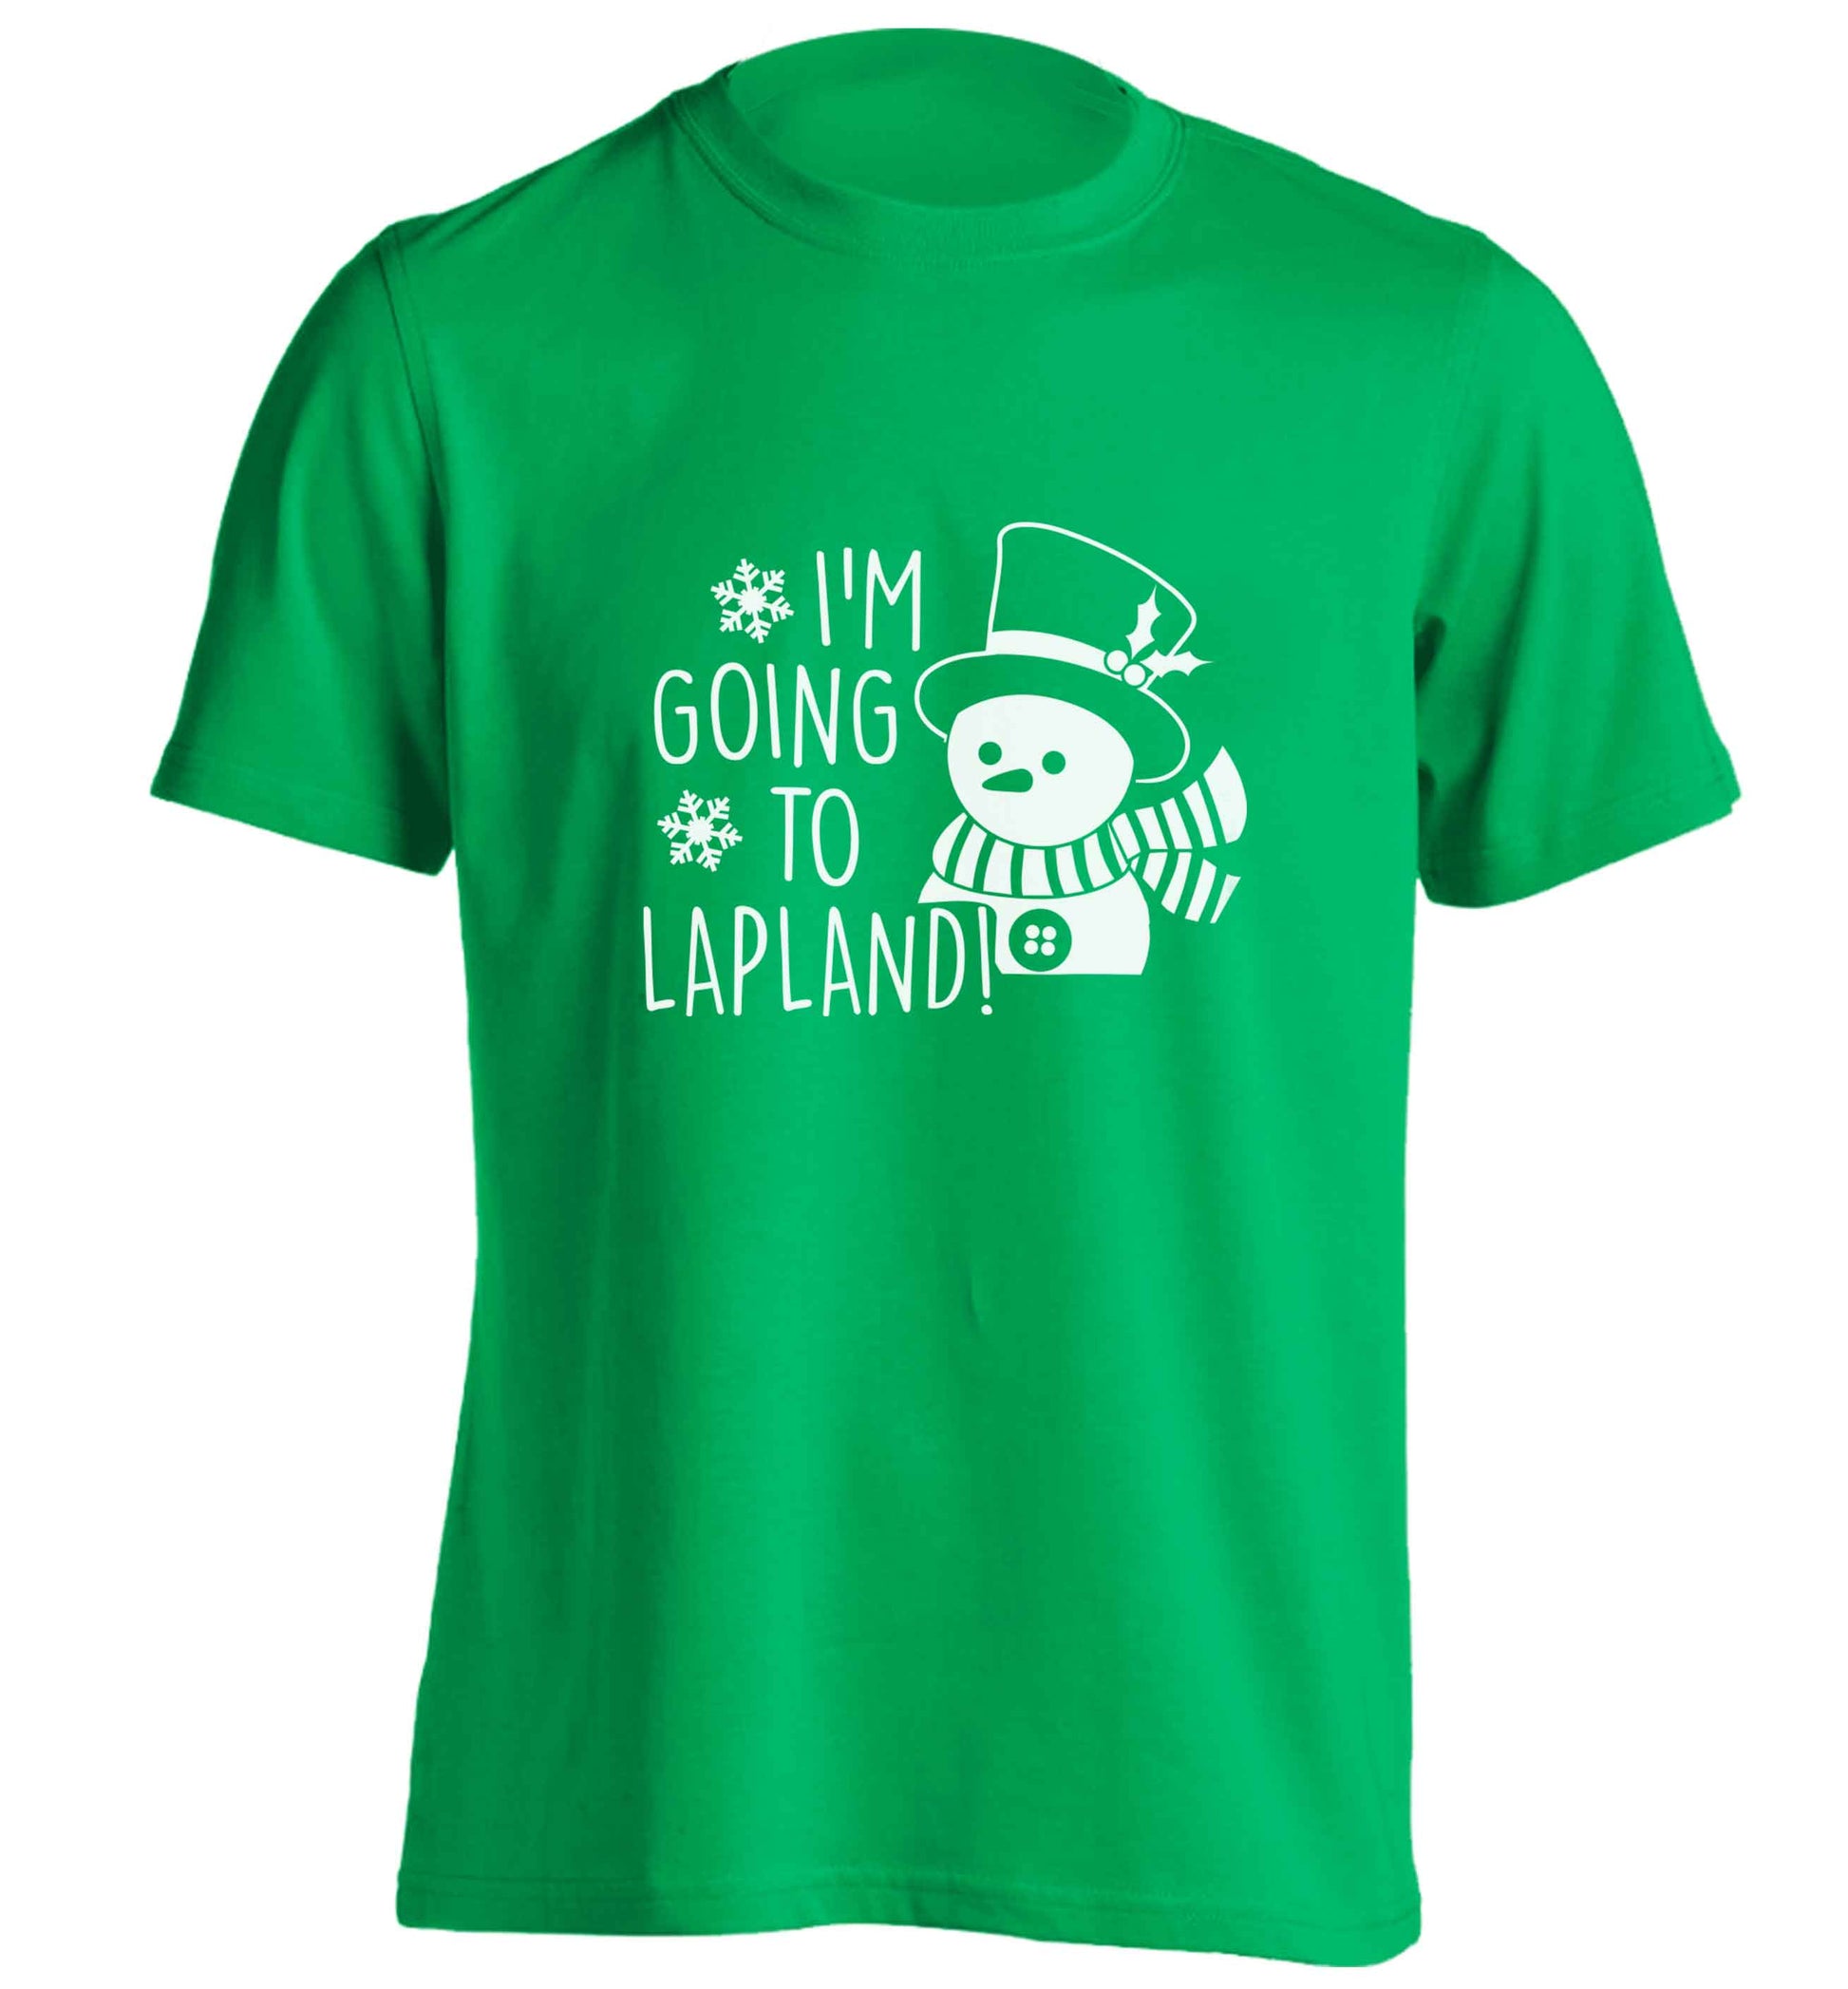 I'm going to Lapland adults unisex green Tshirt 2XL